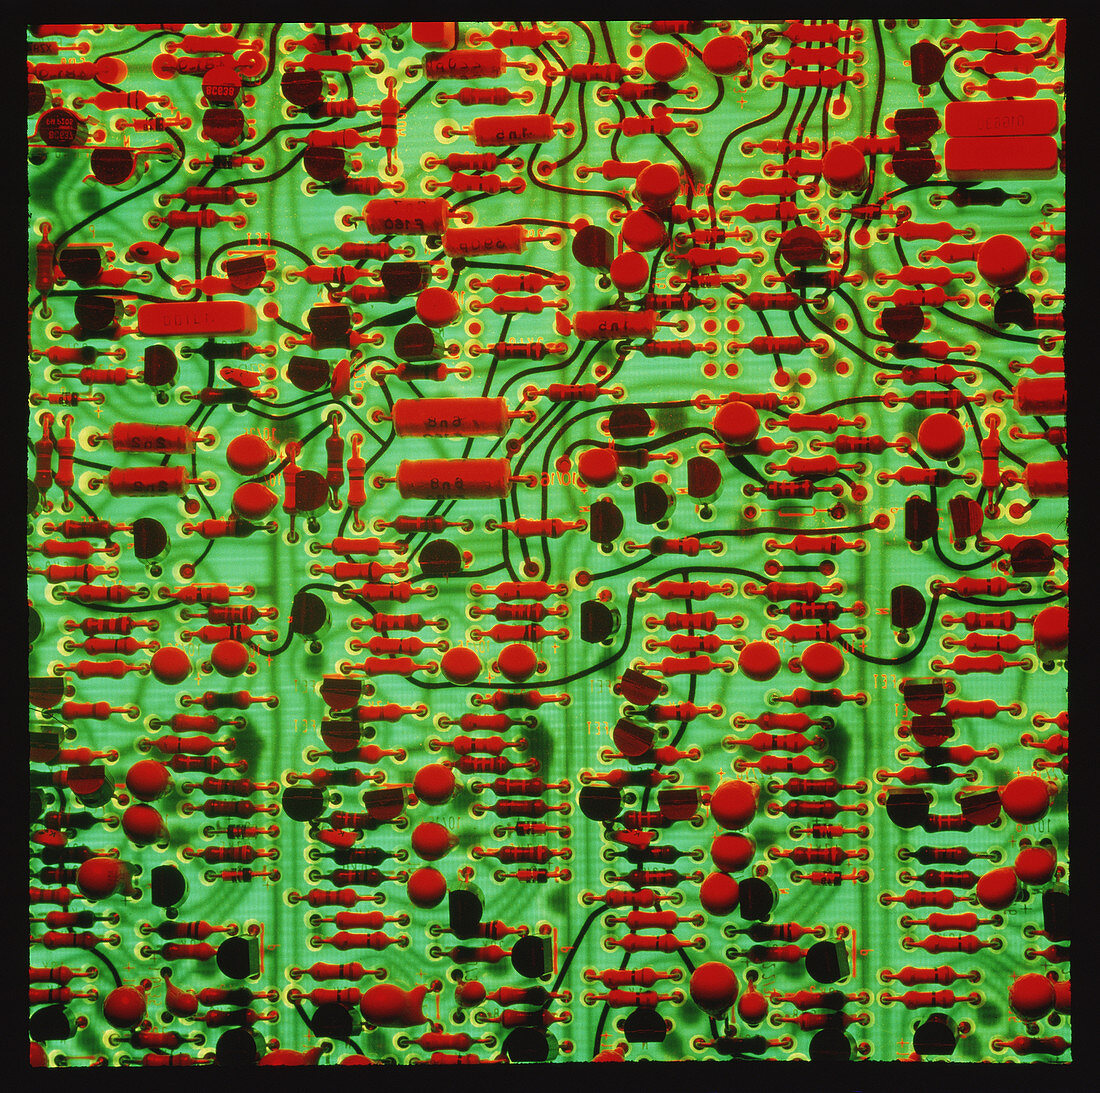 Circuit board showing its electronic components